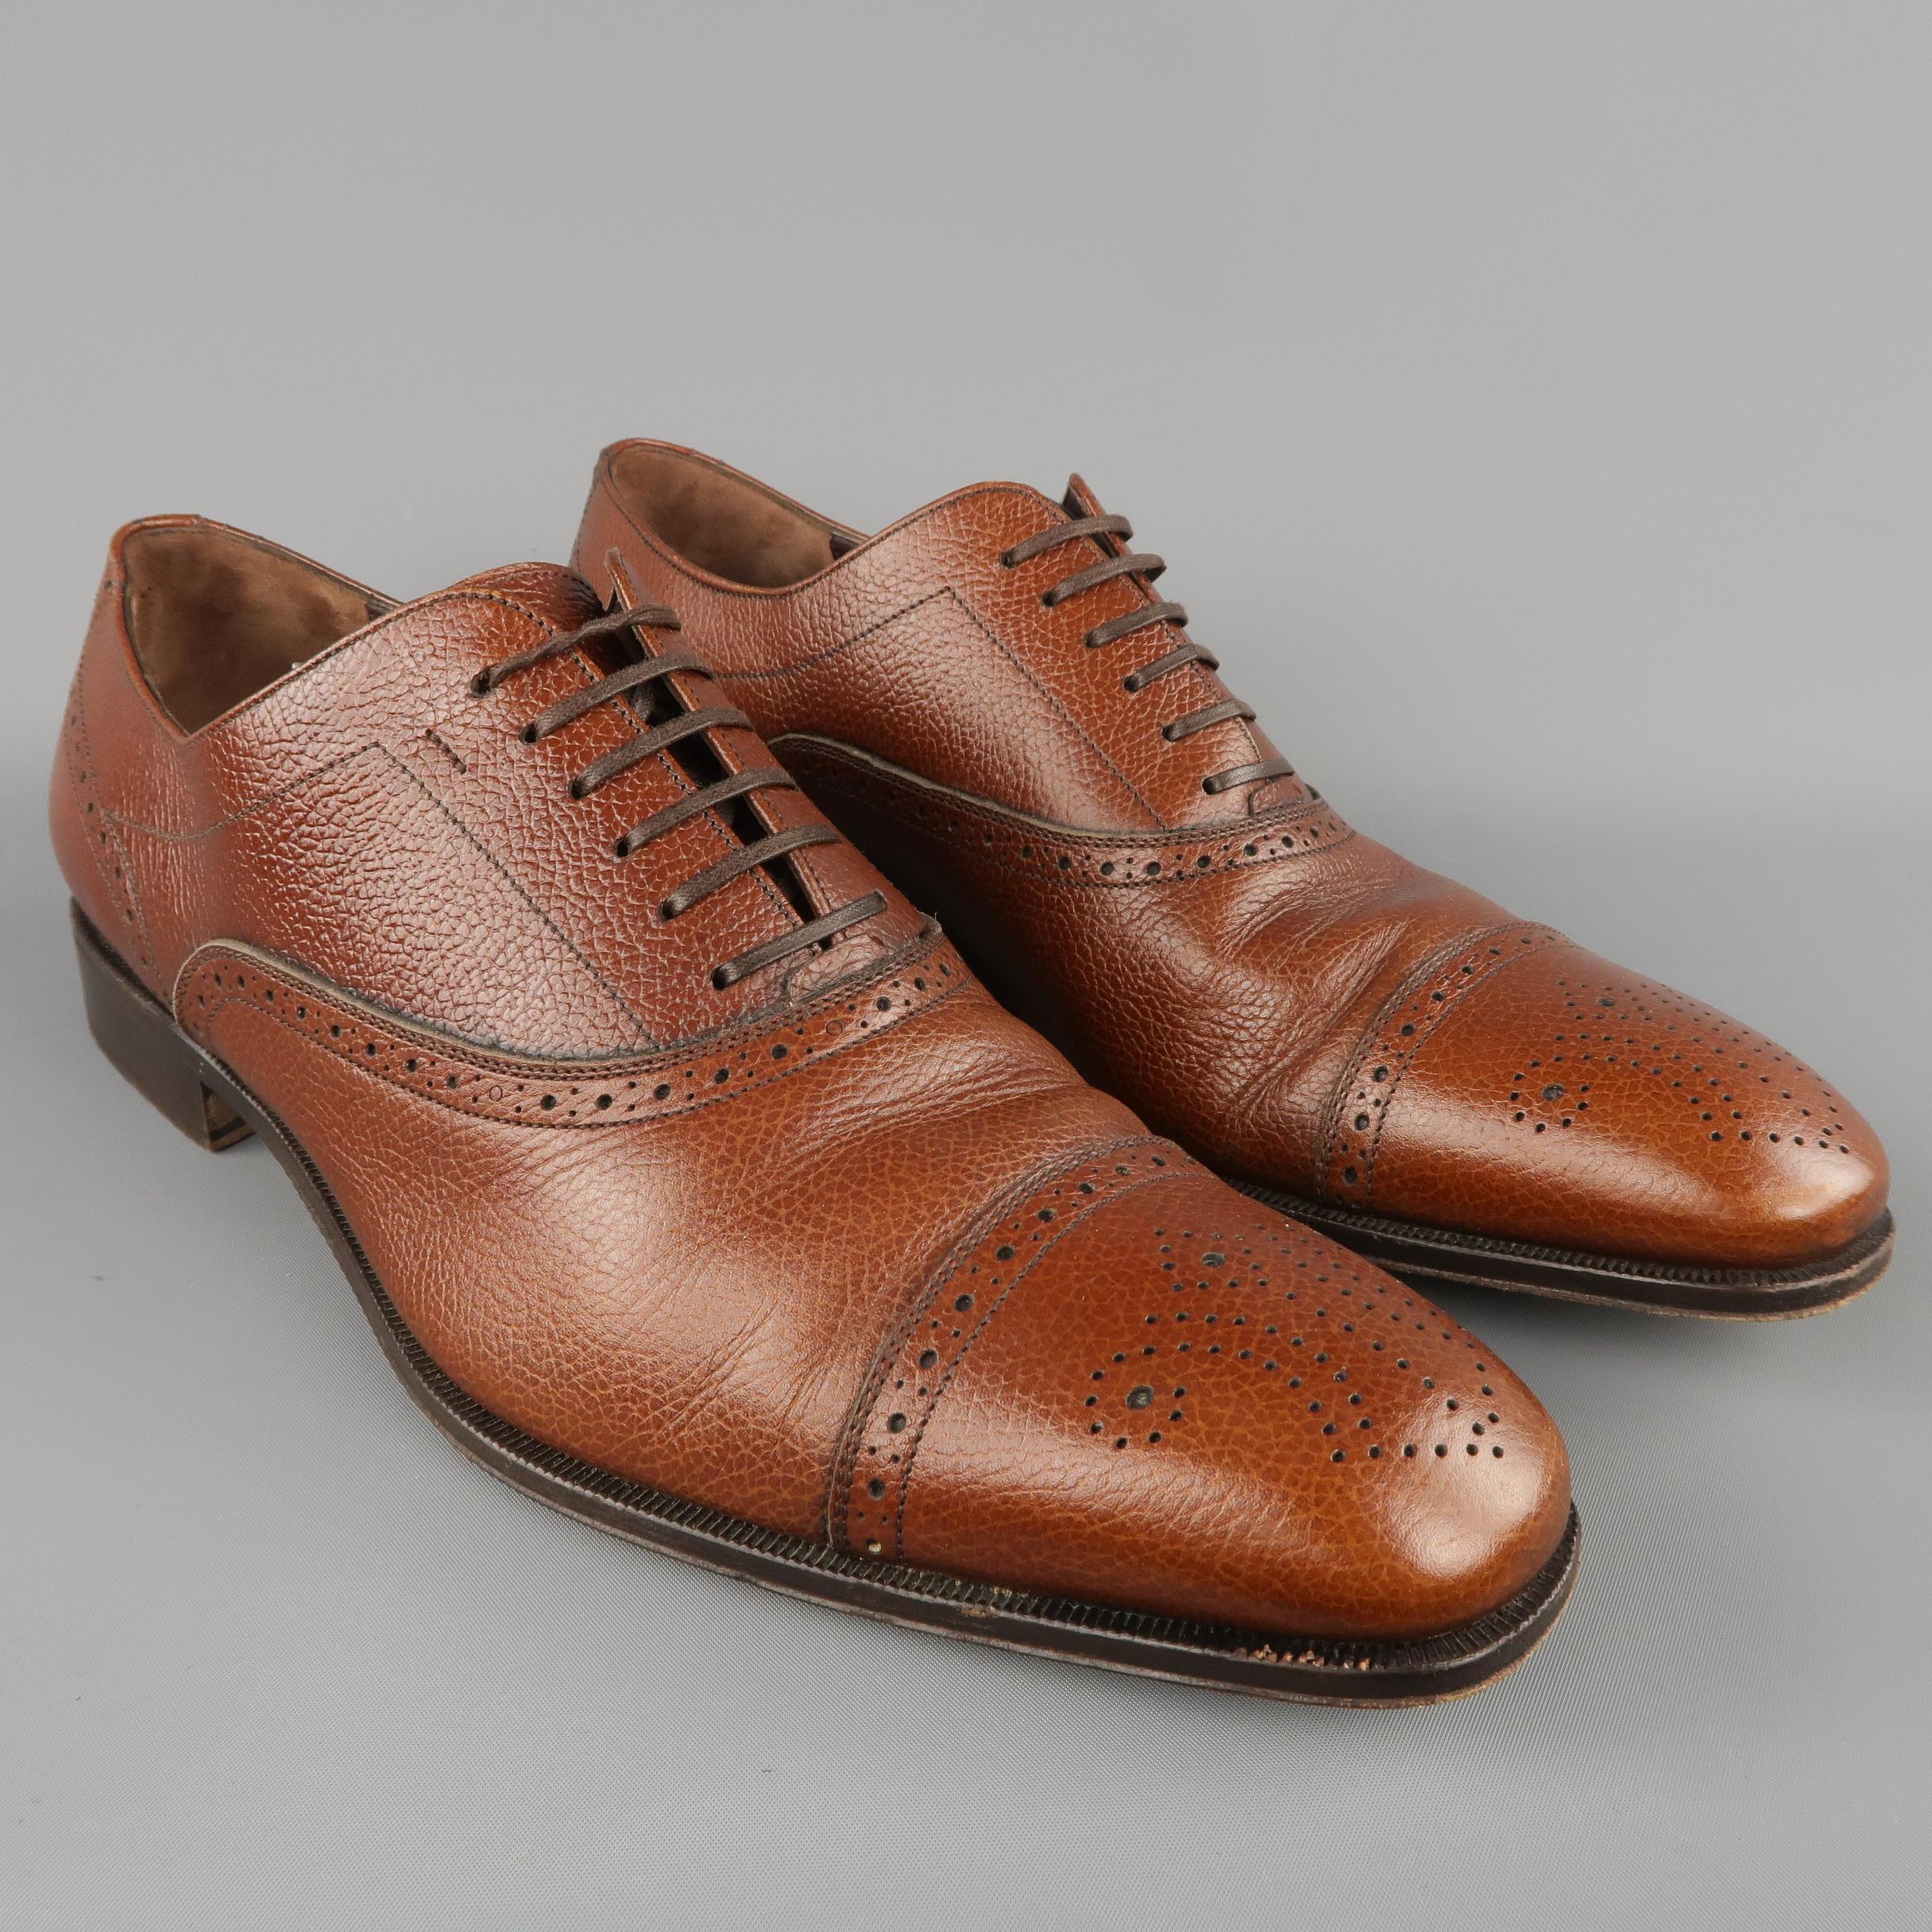 SALVATORE FERRAGAMO dress shoes come in tan textured leather with a wingtip cap toe and brogueing. Made in Italy.
 
Excellent Pre-Owned Condition.
Marked:UK 11
 
Outsole: 12.5 in x 4 in.